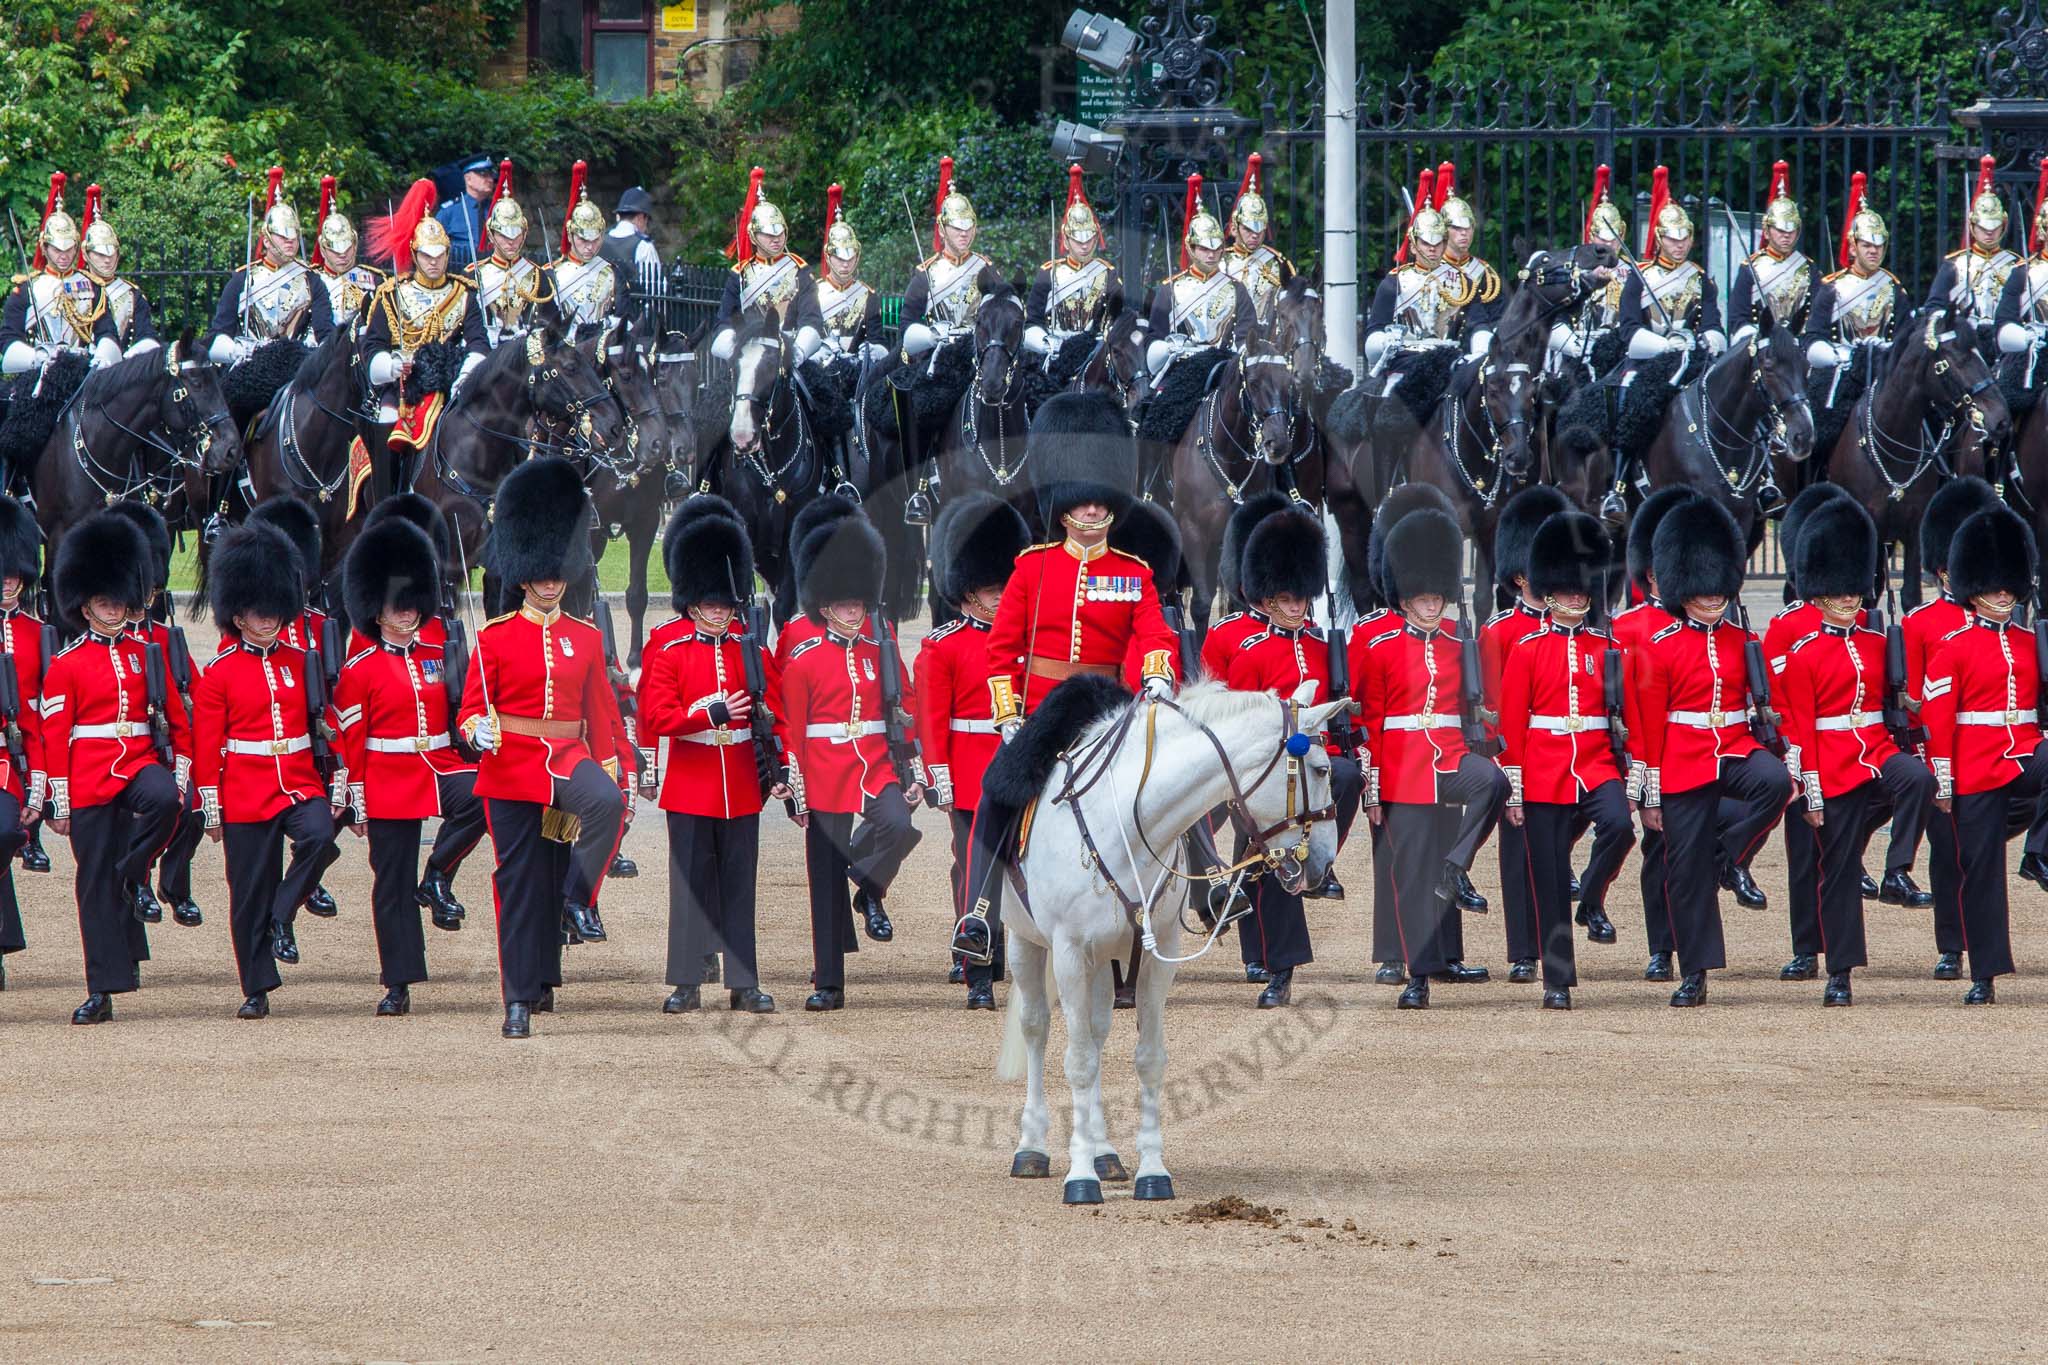 The Colonel's Review 2013: The Field Officer in Brigade Waiting, Lieutenant Colonel Dino Bossi, Welsh Guards, calls the guards to attention..
Horse Guards Parade, Westminster,
London SW1,

United Kingdom,
on 08 June 2013 at 11:18, image #494